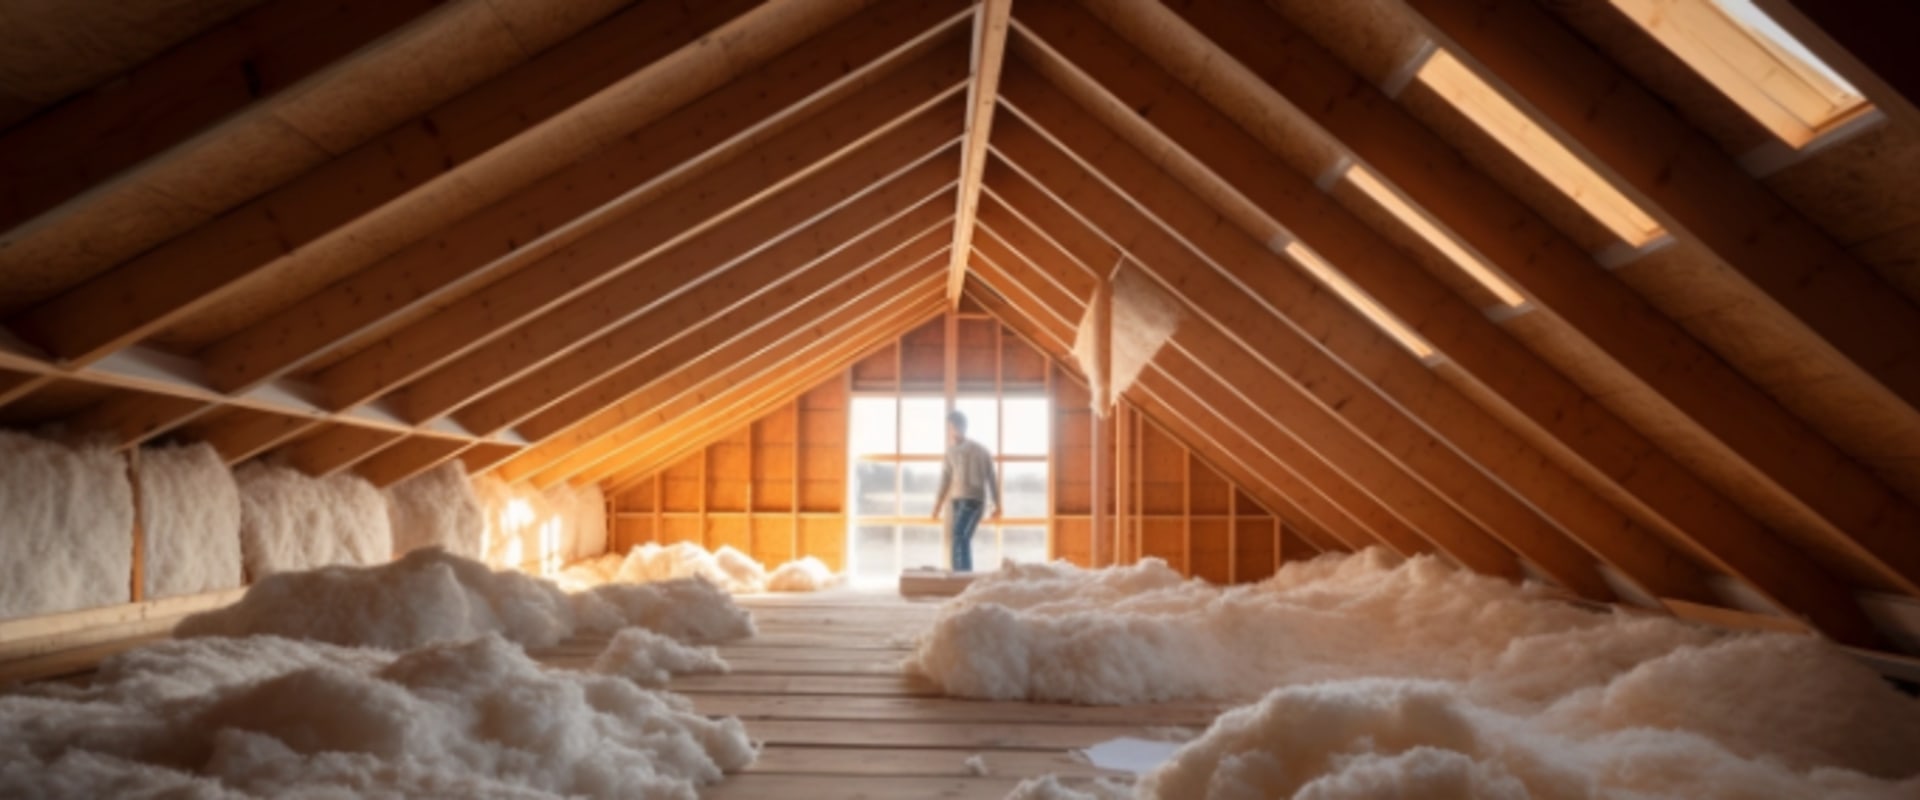 Benefits of Proper Insulation for Your Home